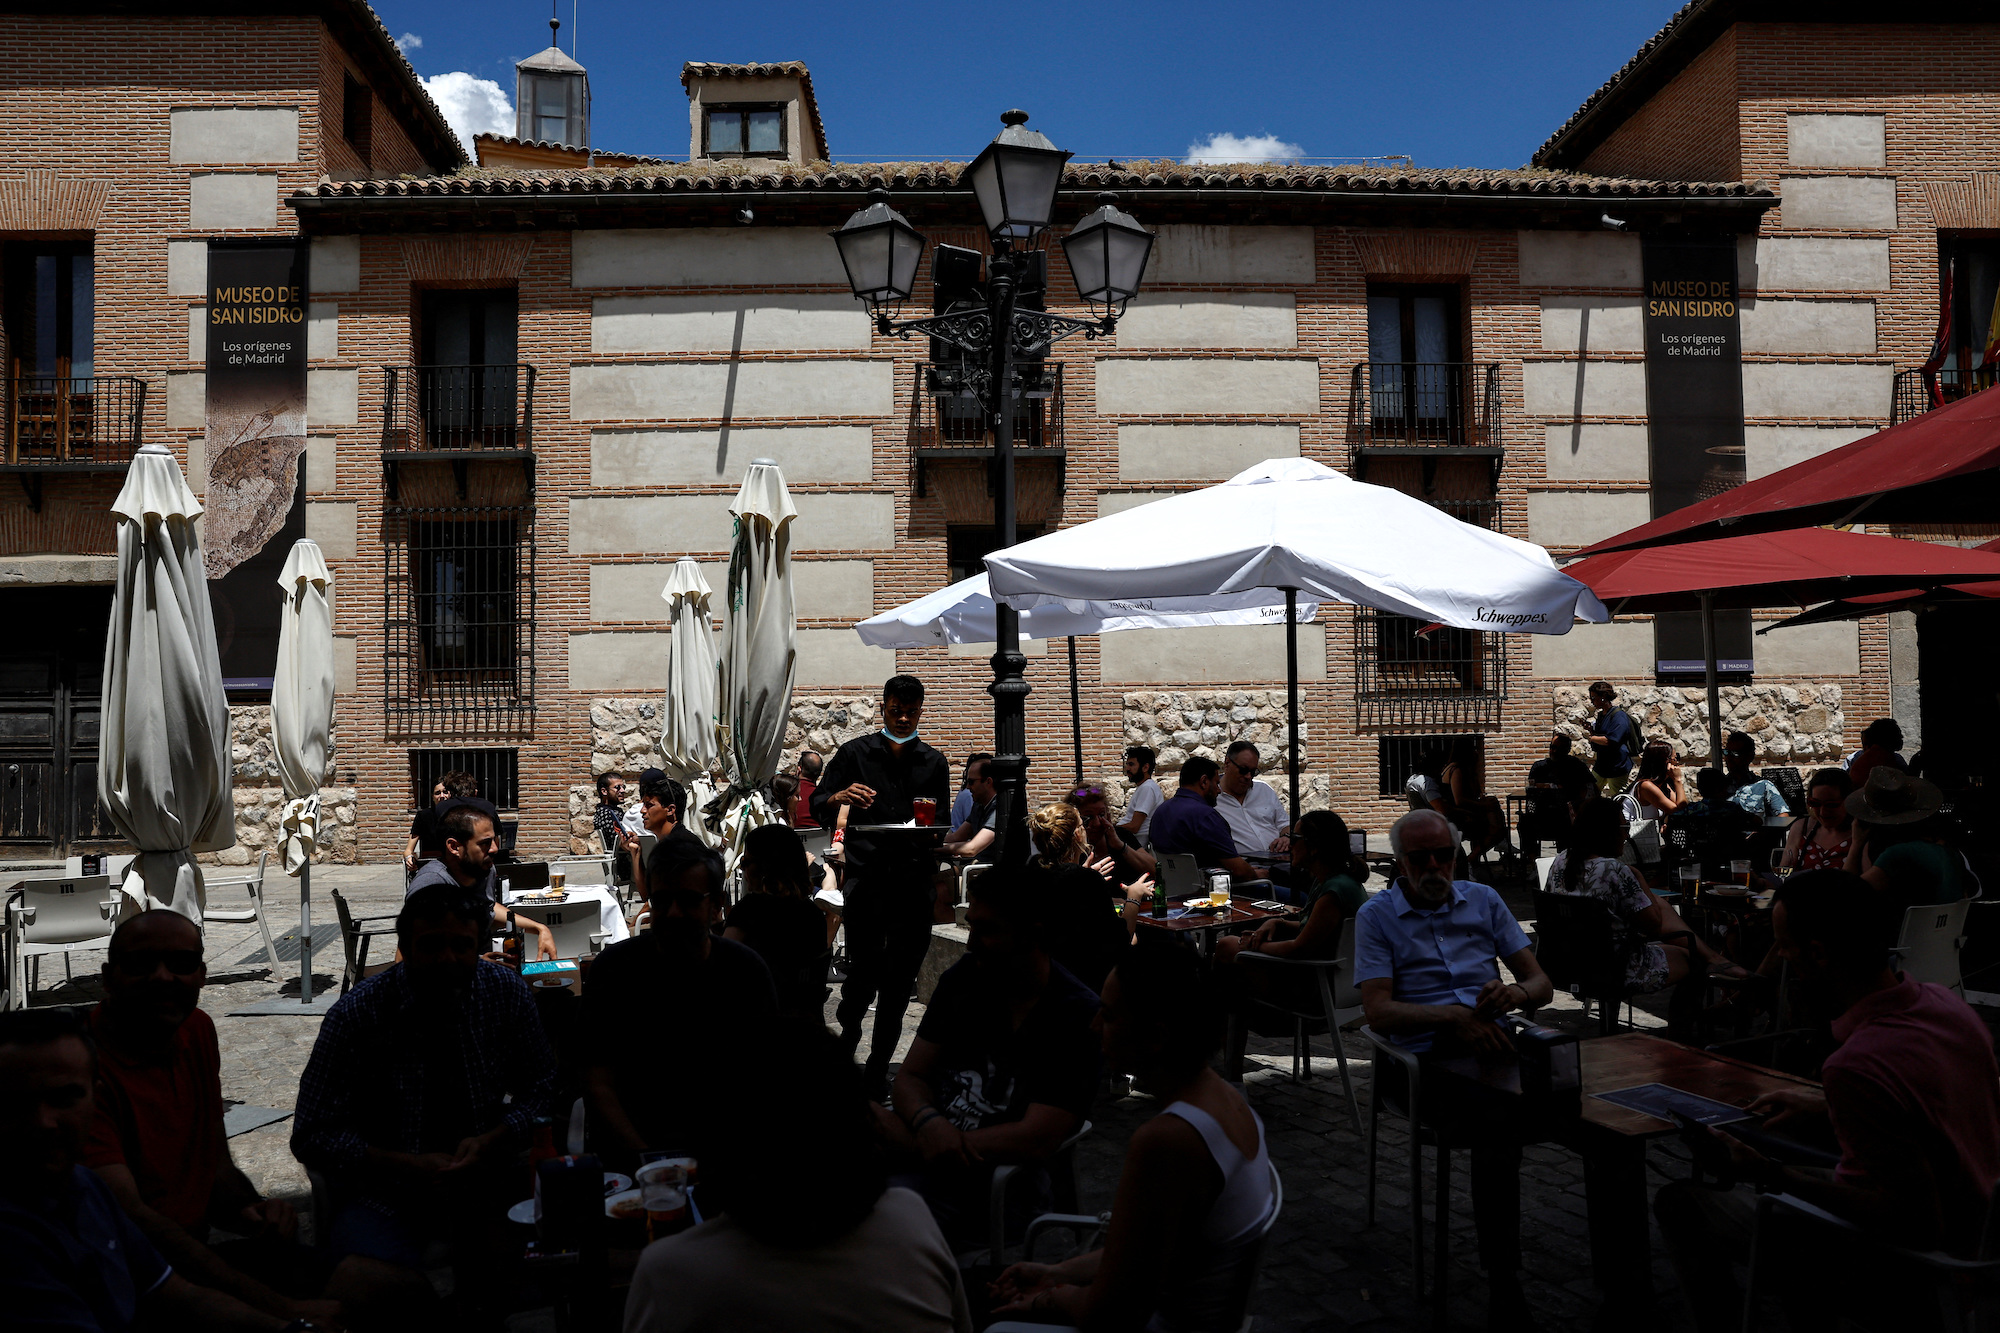 No experience, no resume, you're hired! European hotels fight for staff: A waiter works at a crowded restaurant terrace in central Madrid, Spain